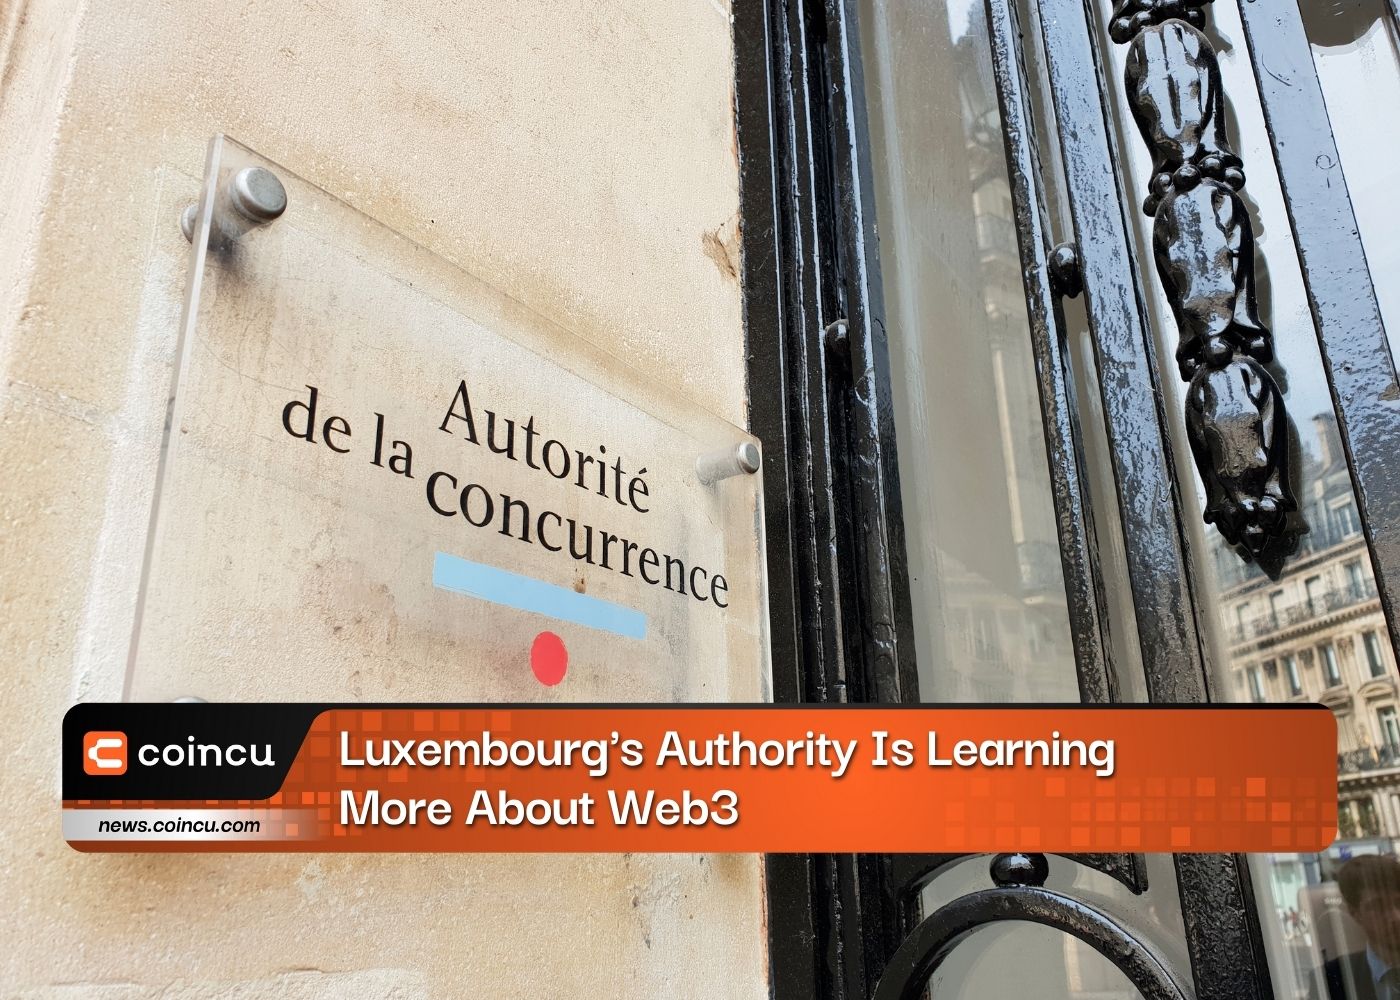 Luxembourg's Authority Is Learning More About Web3